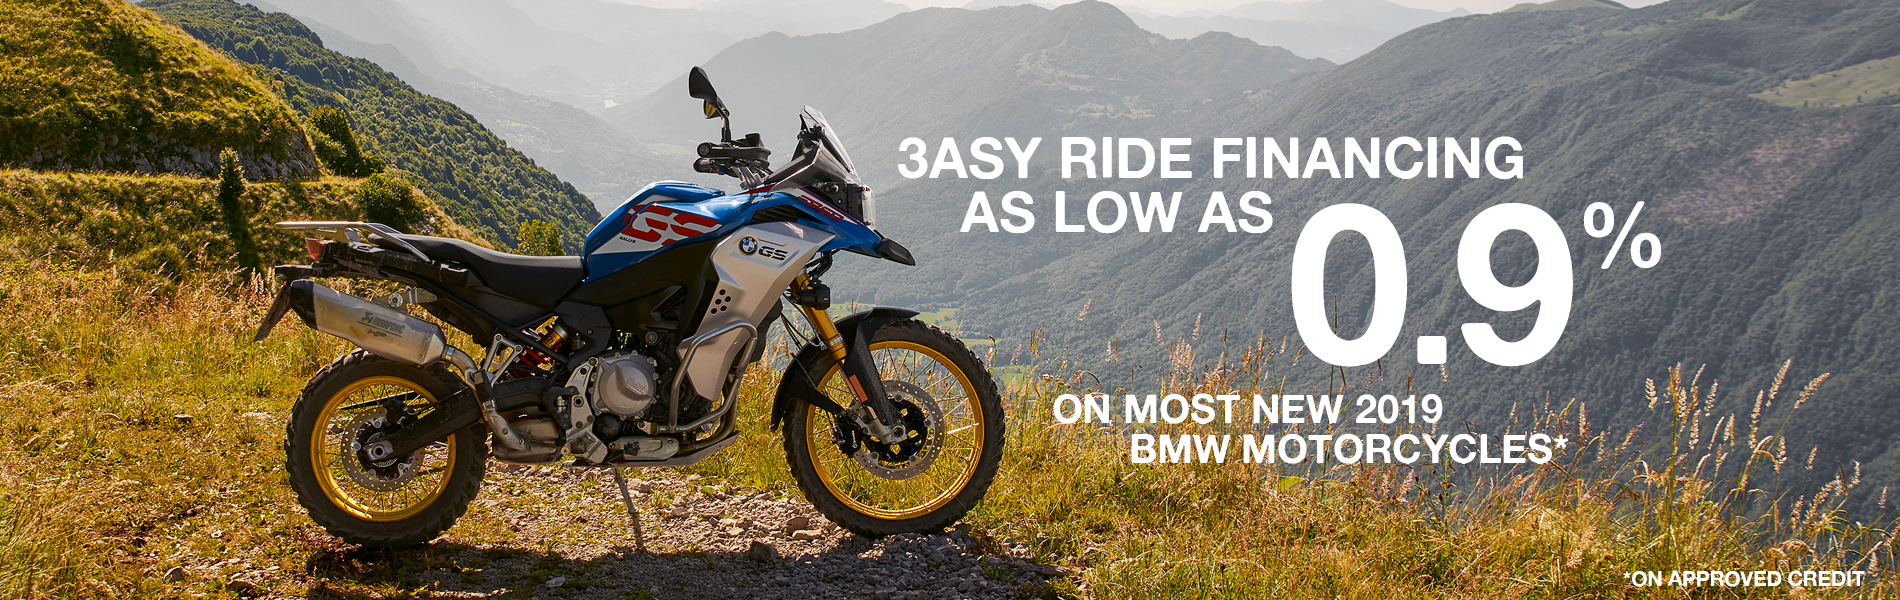 New BMW Motorcycles for Sale | BMW Motorcycles of Riverside